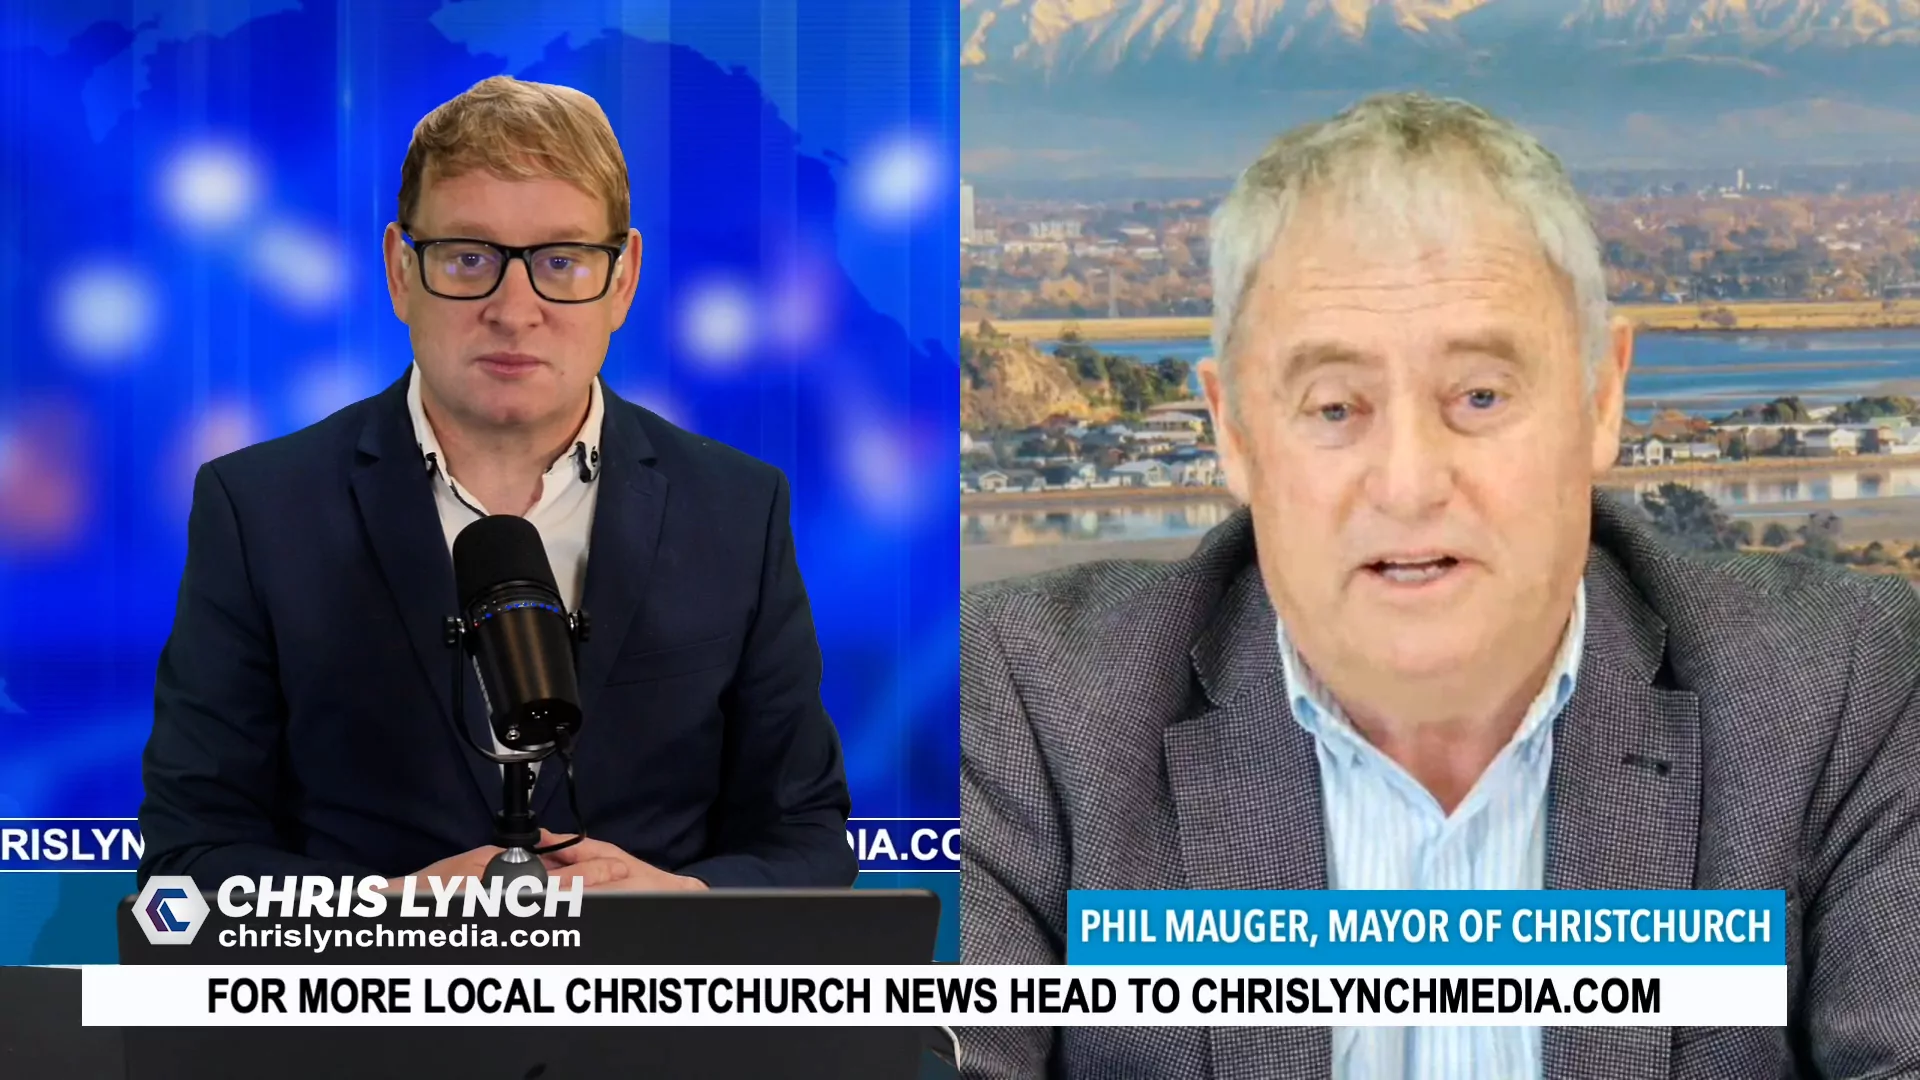 WATCH: Christchurch Mayor praises 10 year deal for renamed One New Zealand Stadium